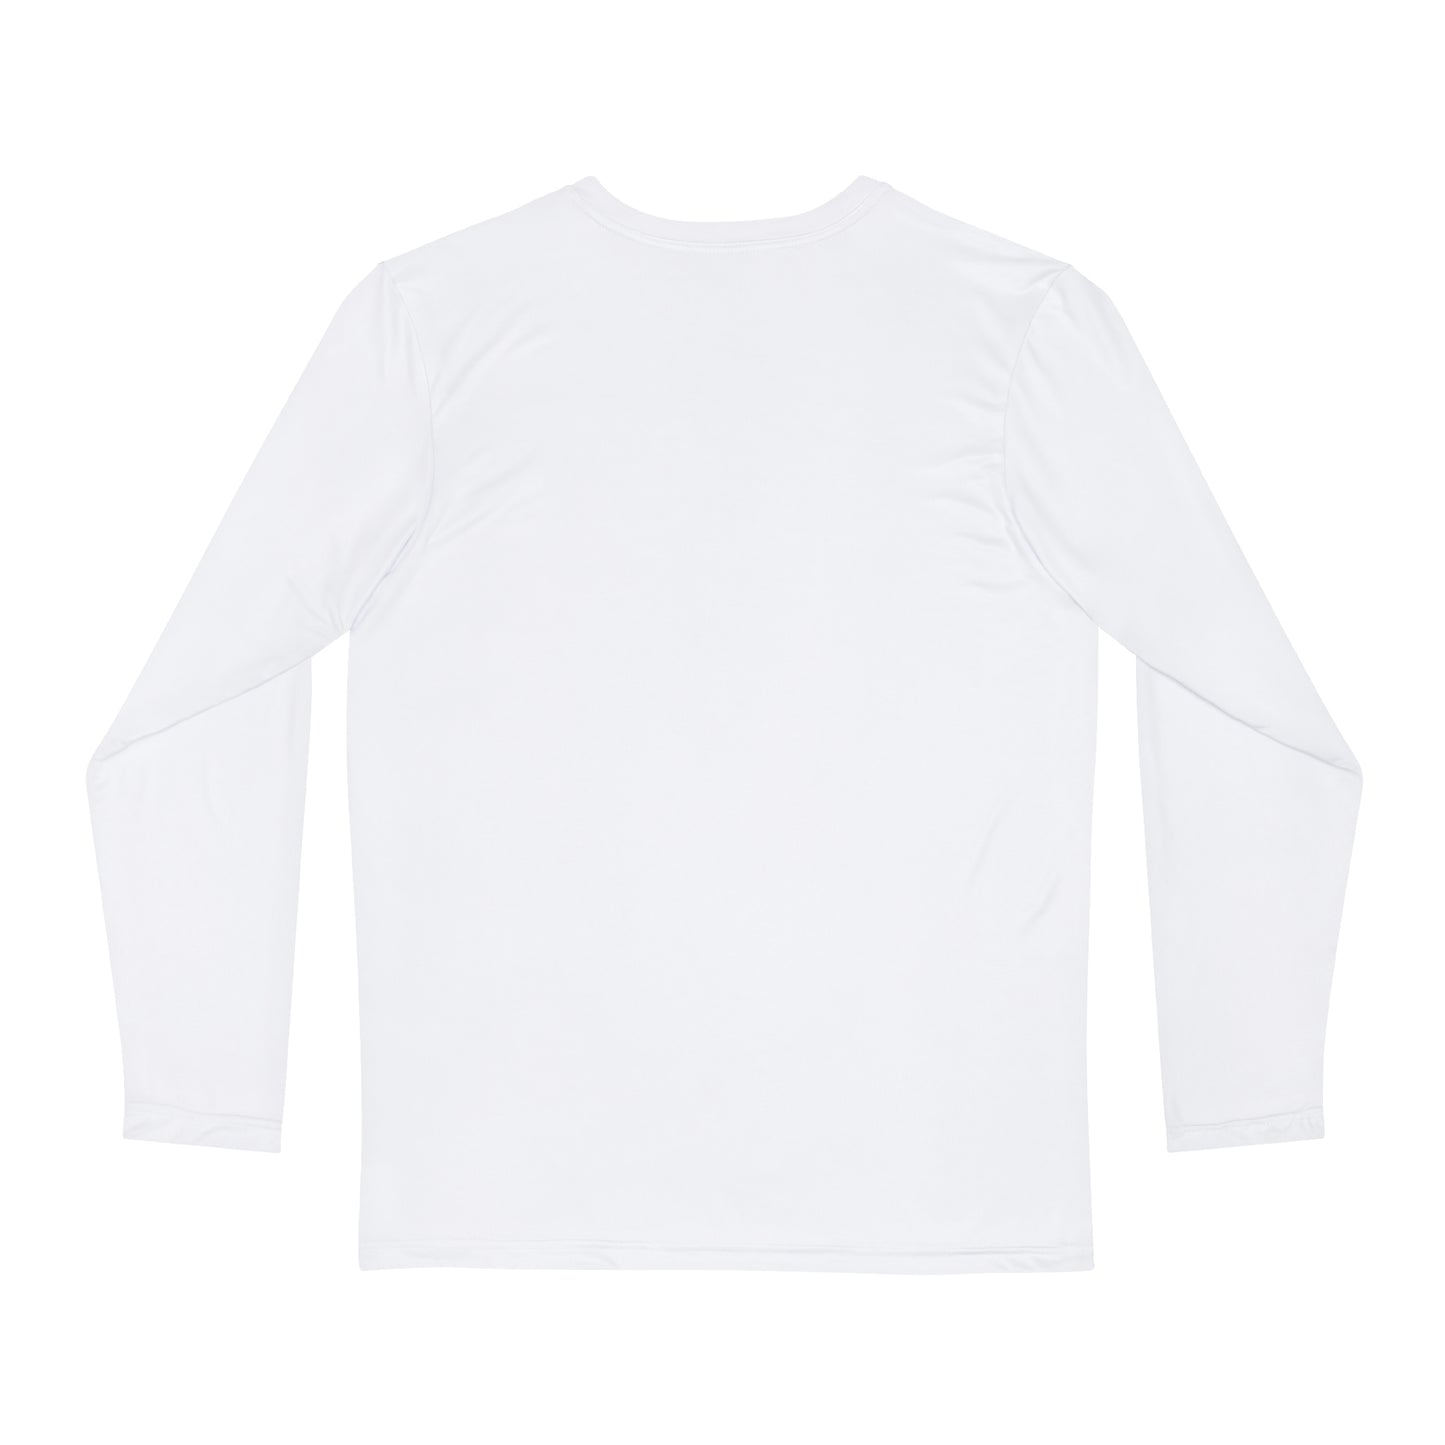 Permaculture - Men's Long Sleeve Shirt